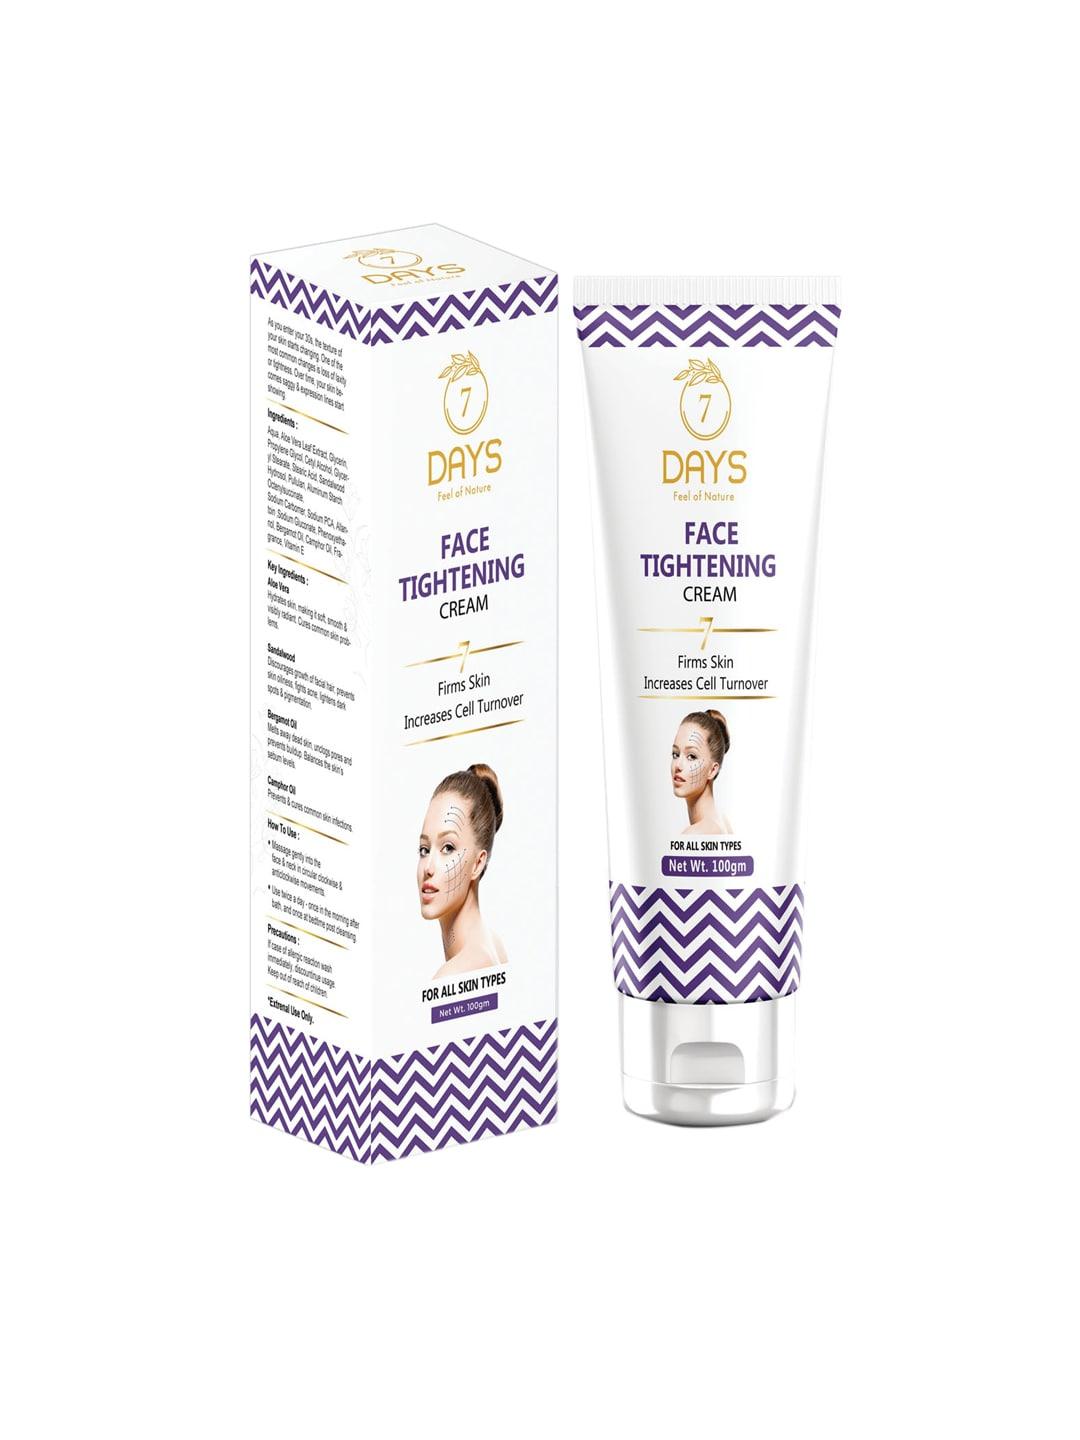 7 DAYS Face Tightening Cream - Reduces Fine Lines & Wrinkles - 100g